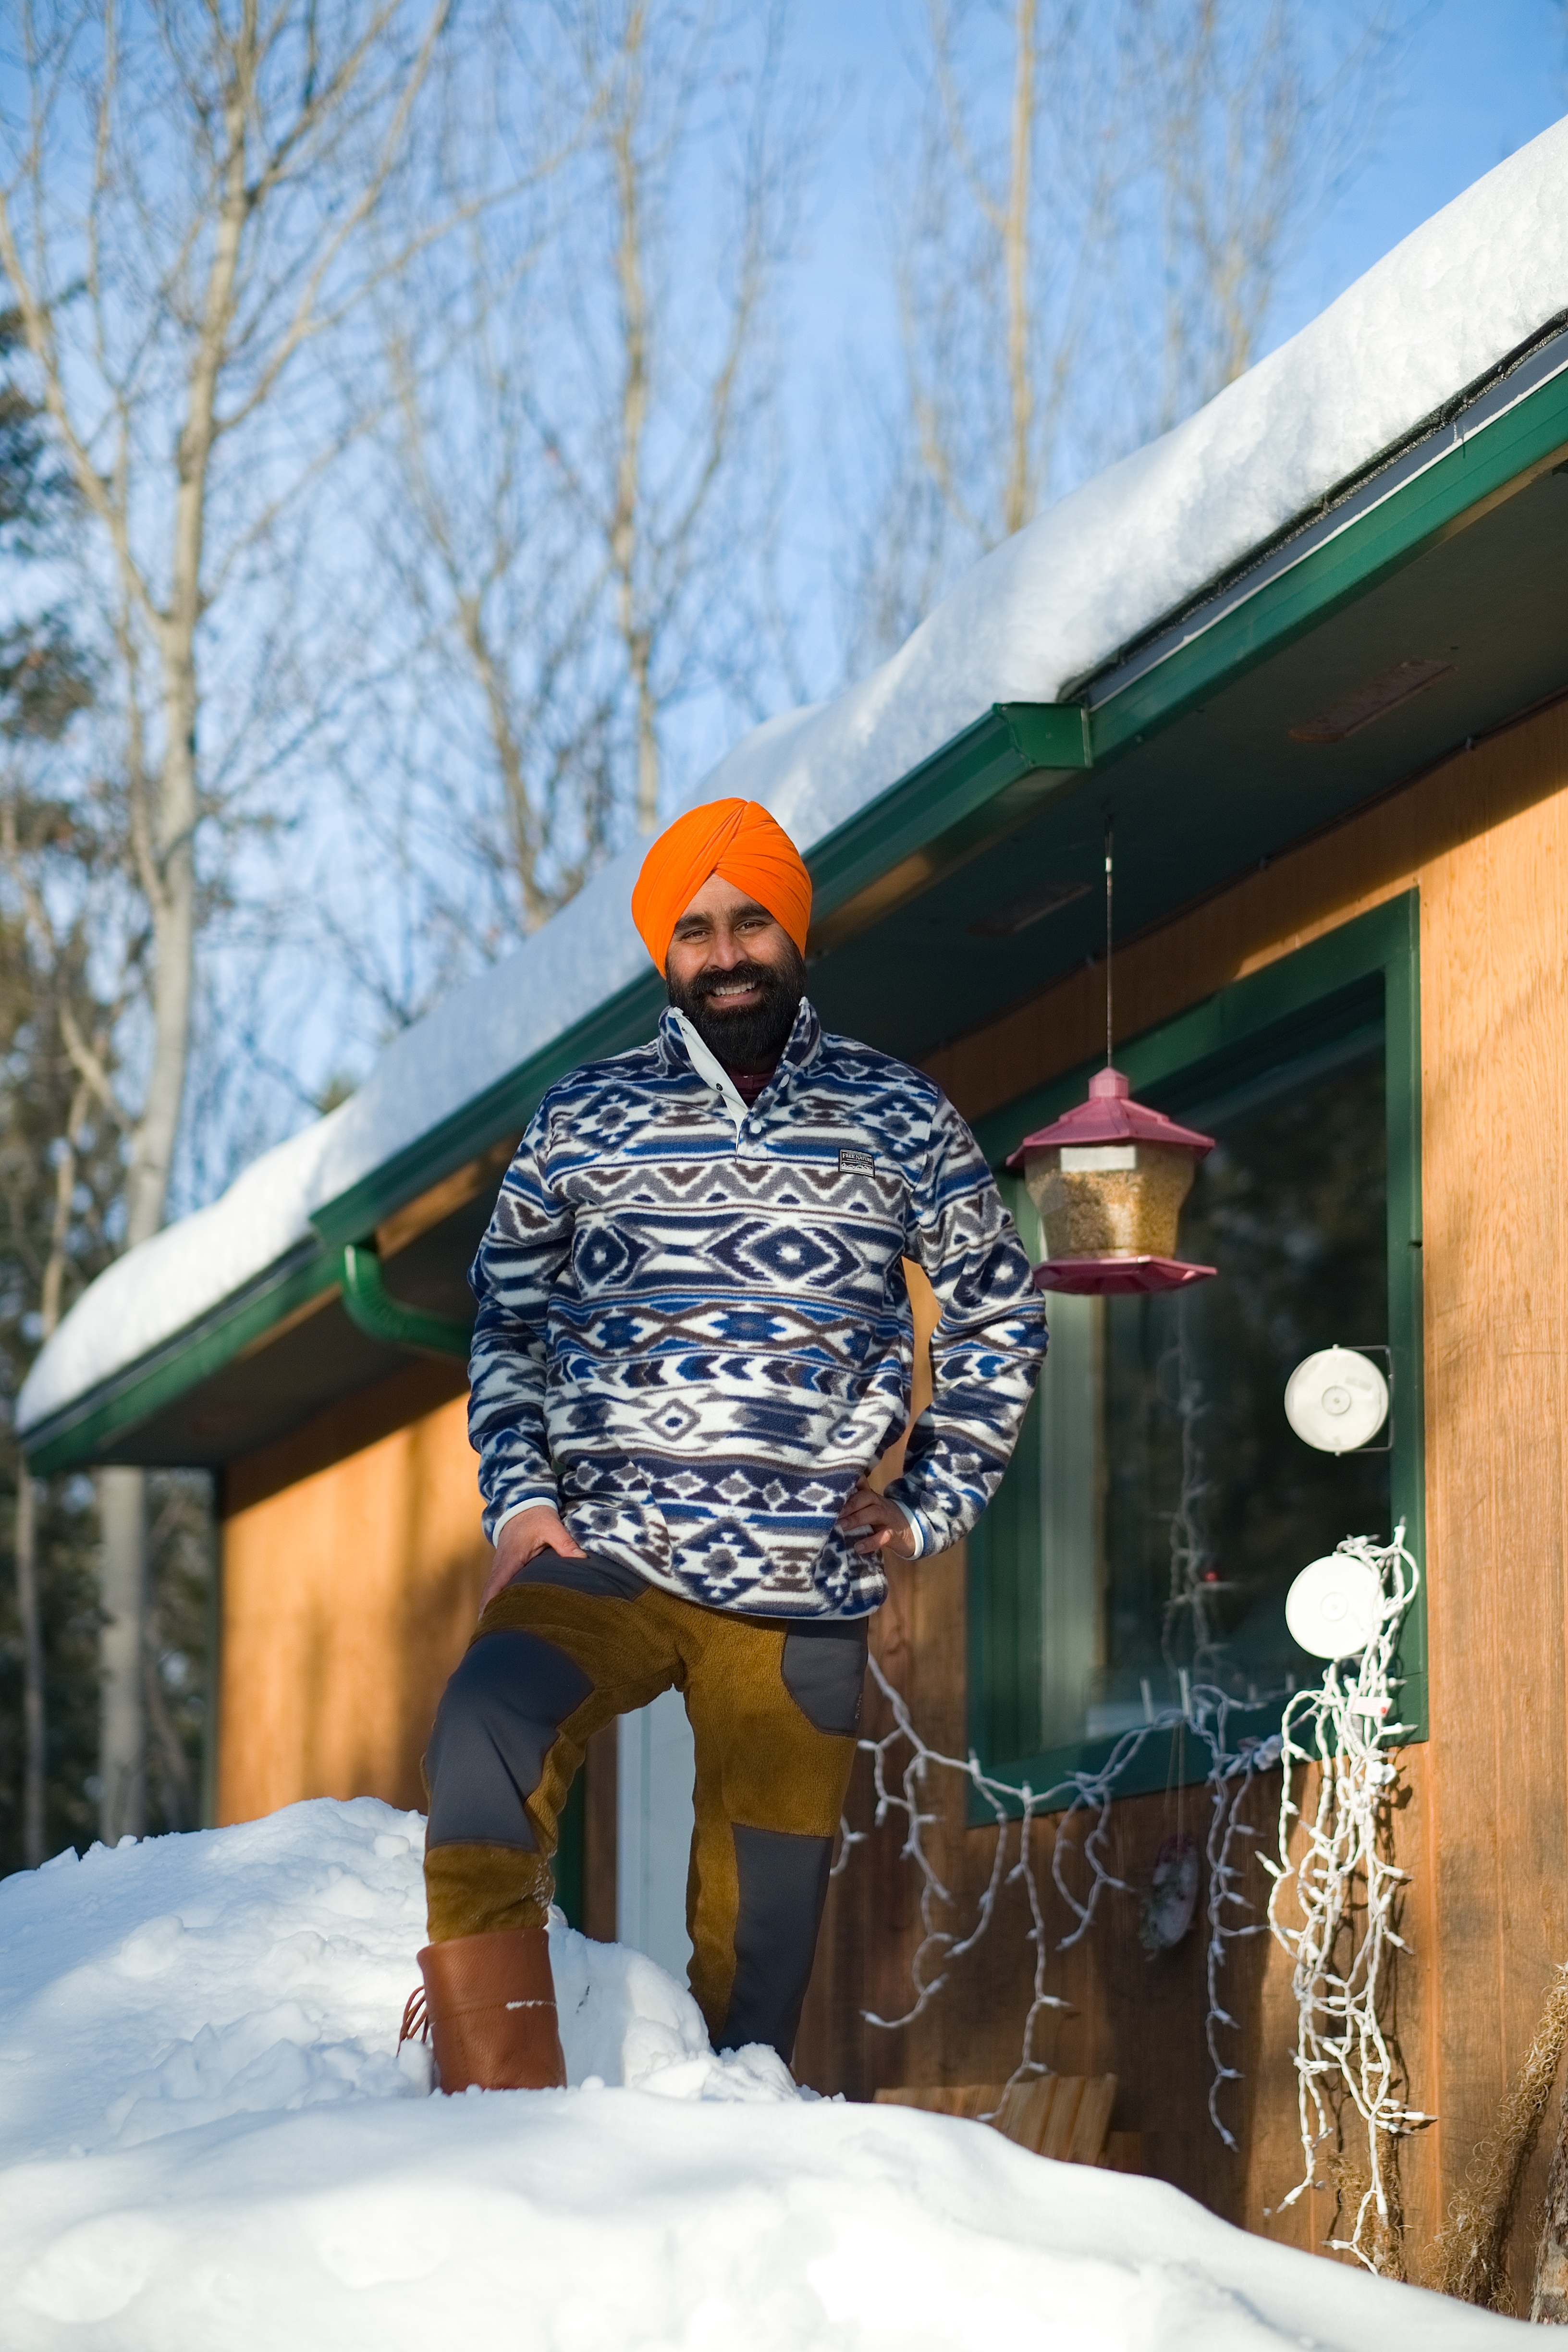 Photograph: Christian Kuntz Photography. Gurdeep stands outside a wooden walled cabin, that is covered in snow. He wears patterned knitwear and patchwork pants